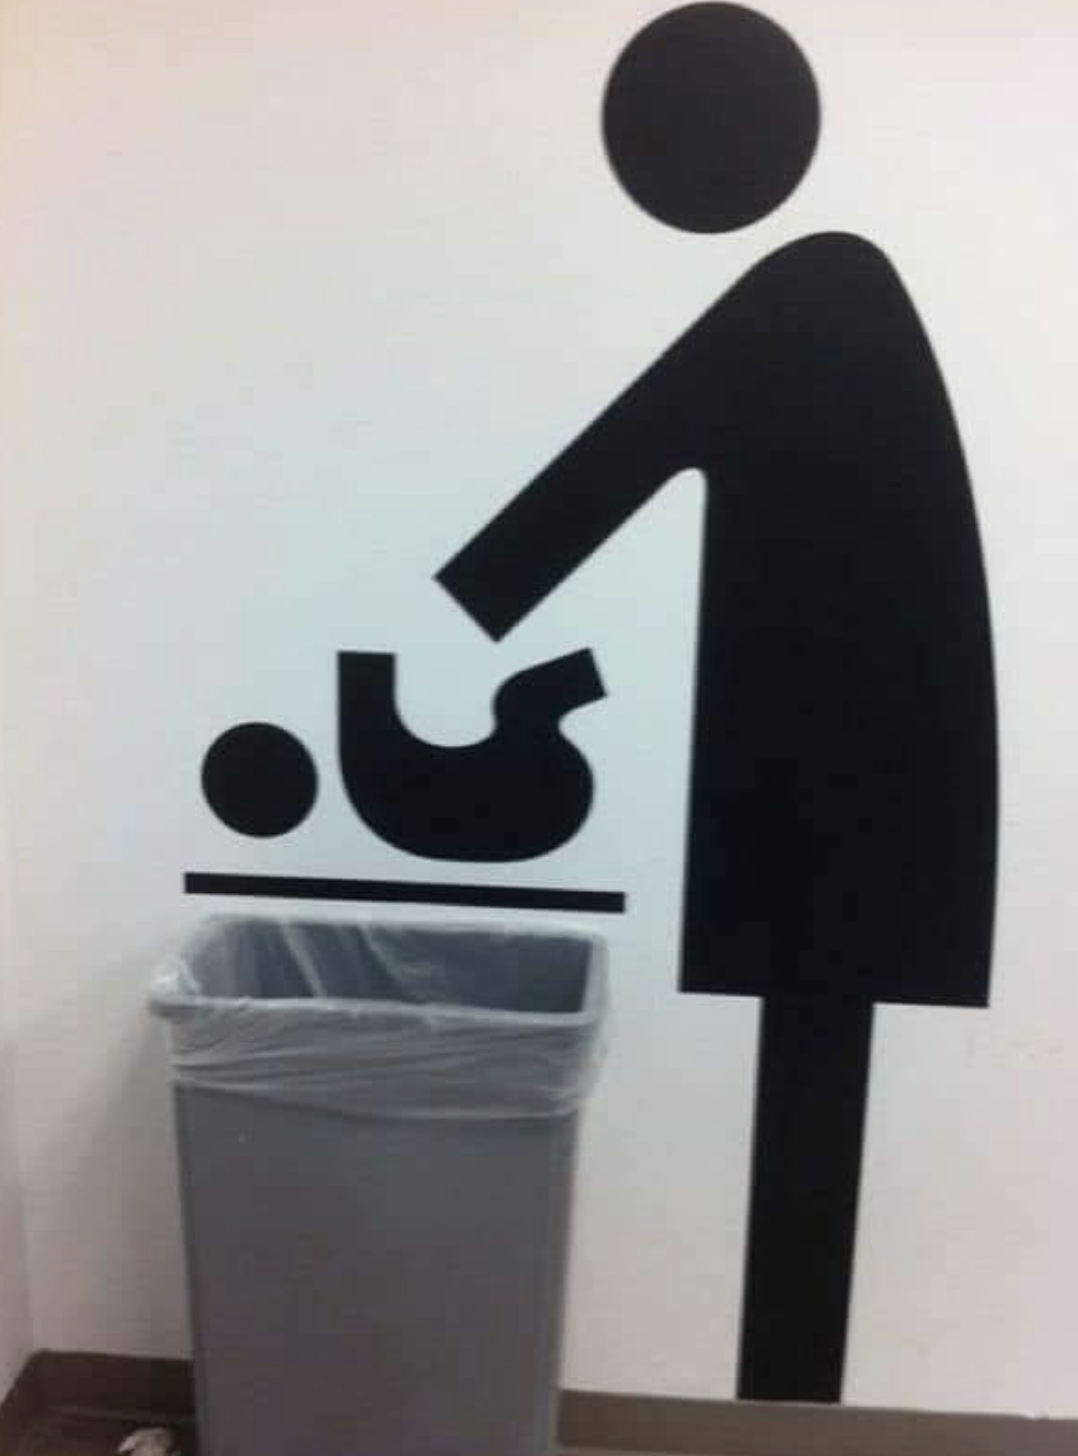 trash can under wall decal that looks like a baby is being thrown inside the can